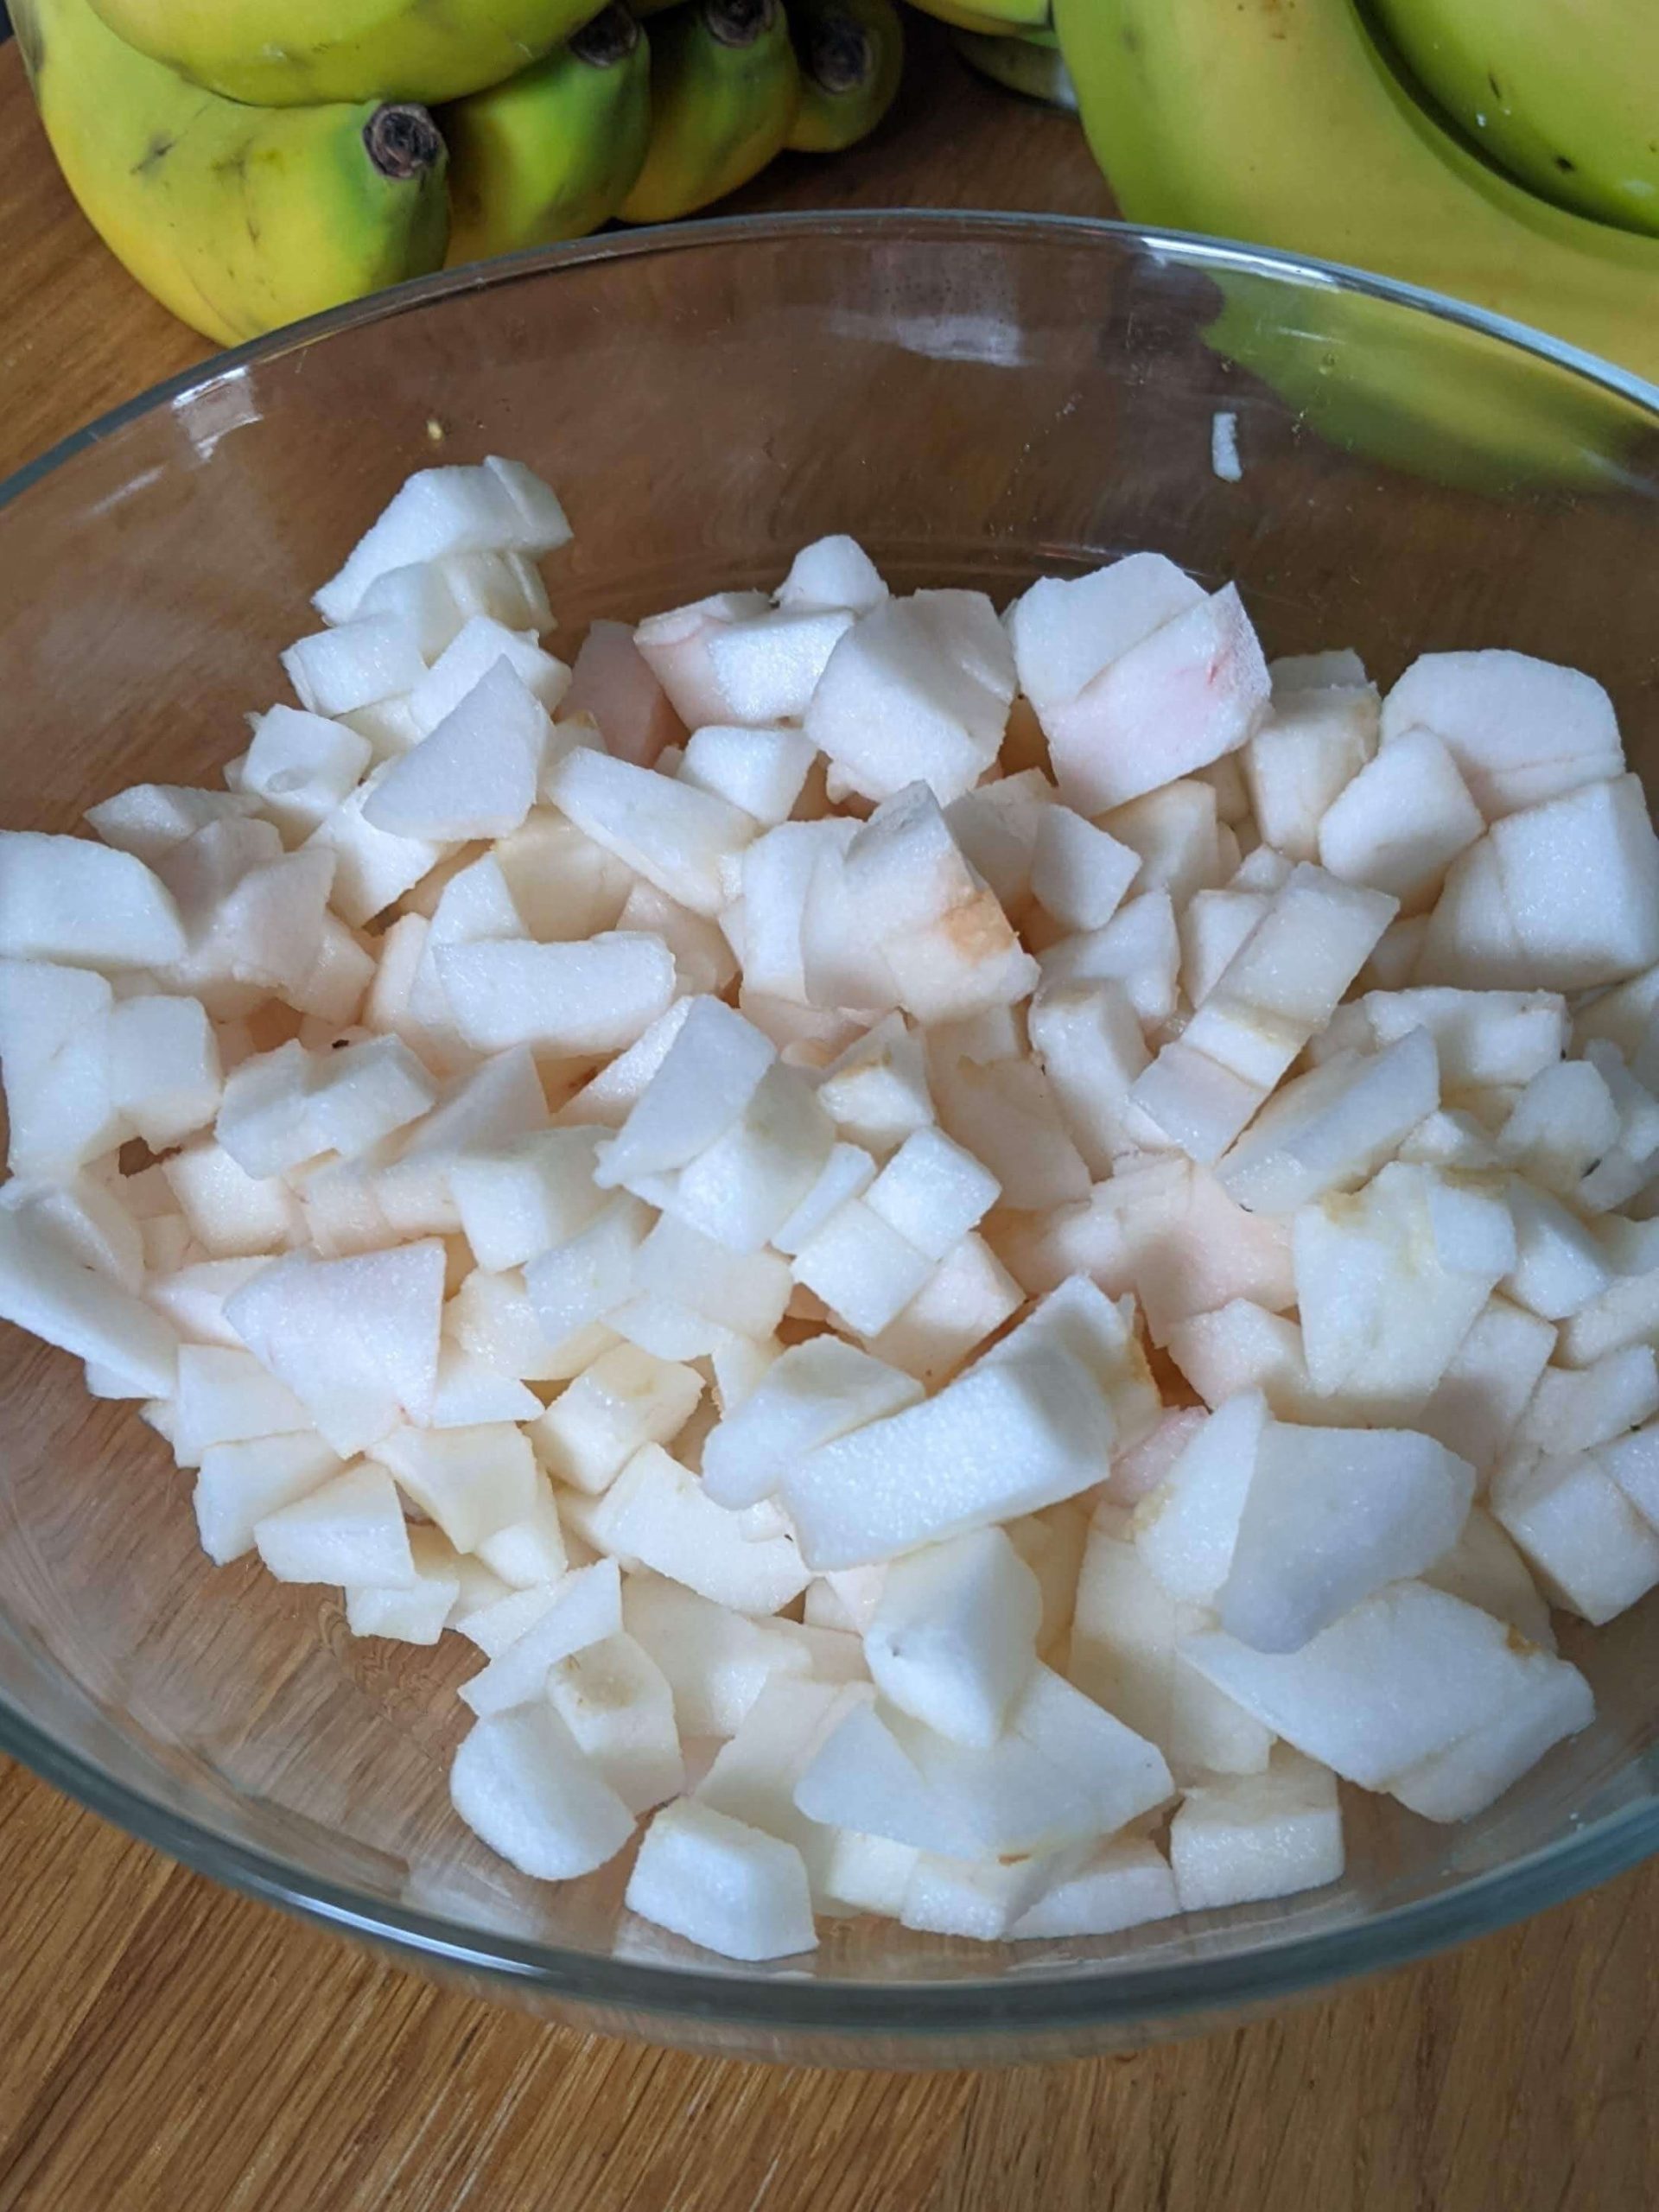 diced apples in a glass bowl